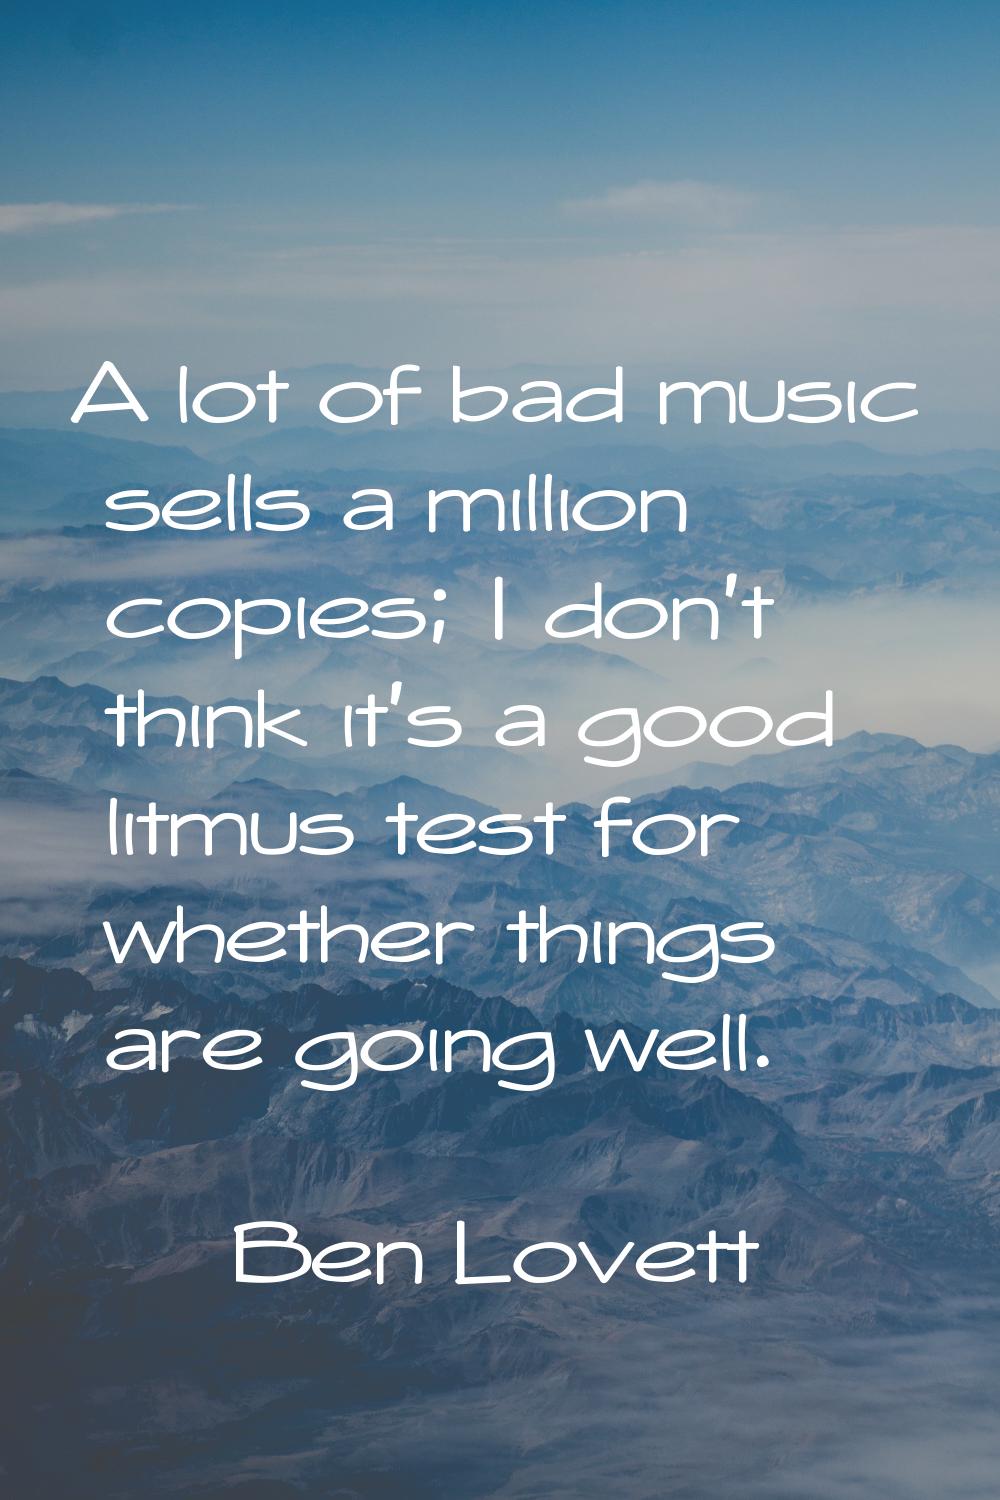 A lot of bad music sells a million copies; I don't think it's a good litmus test for whether things